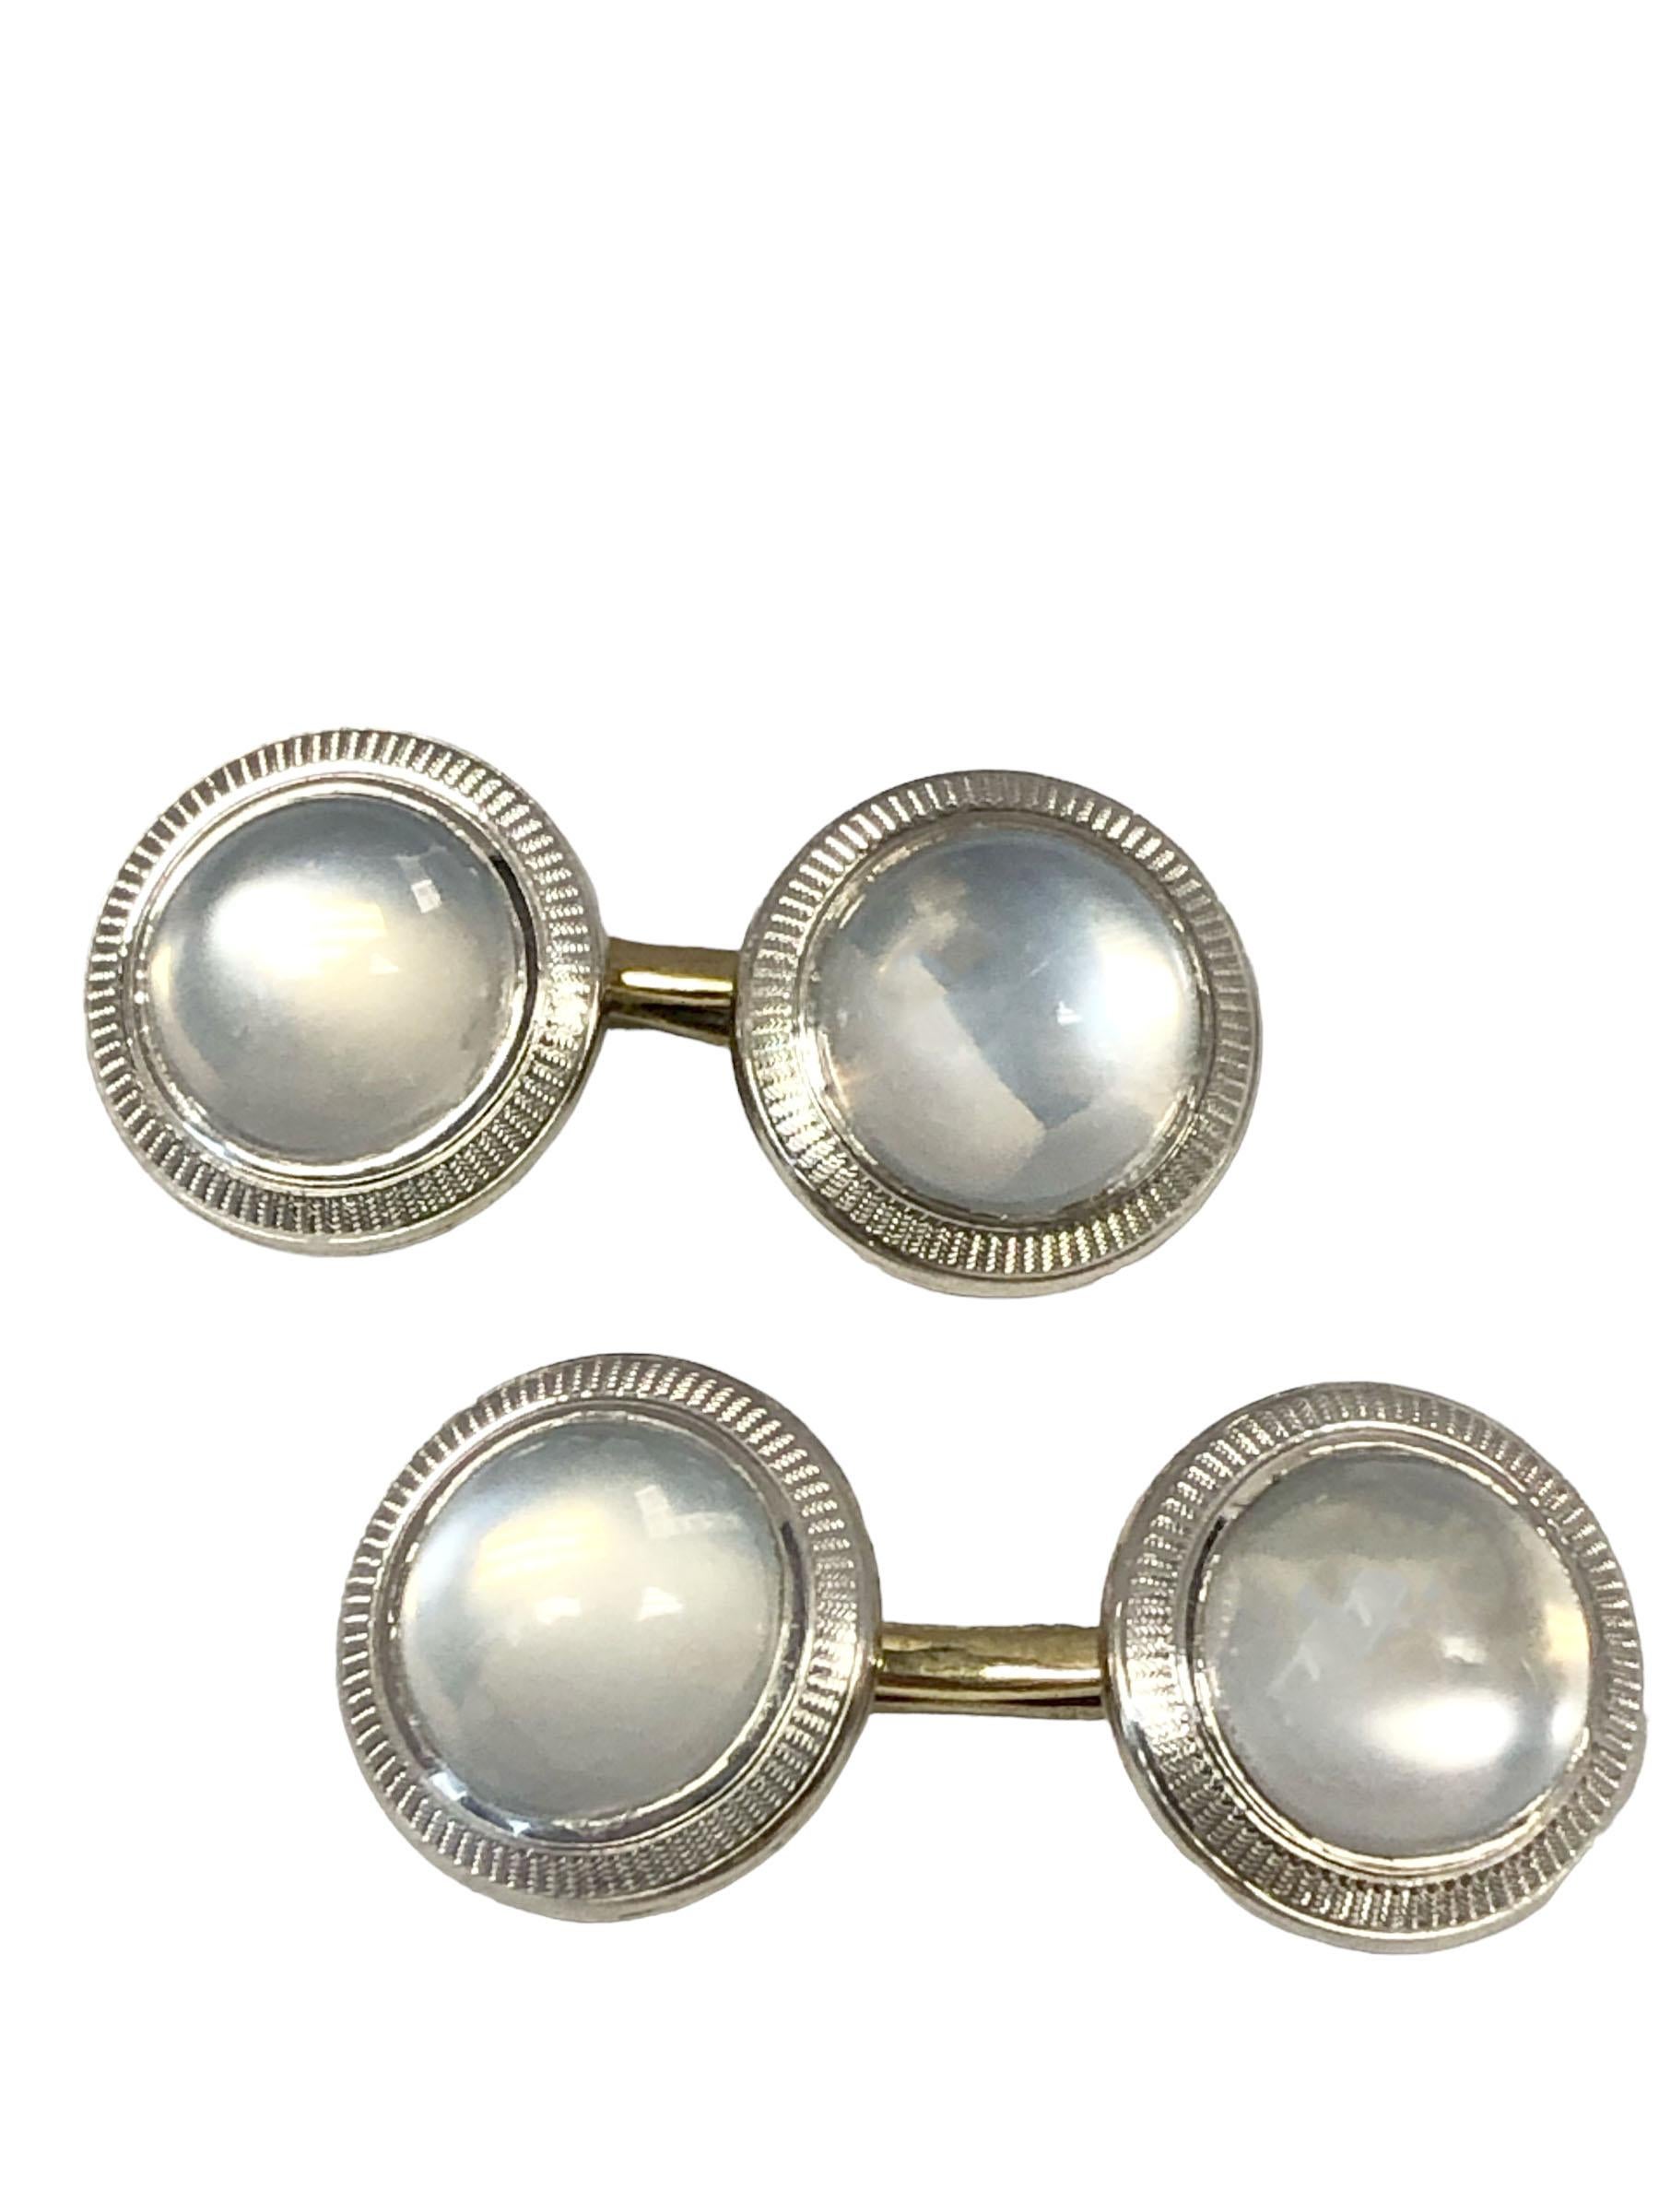 Circa 1930s Spaulding & Company Gents Tuxedo Dress Set, Platinum Top with 14k Yellow Gold Back and set with very fine color Moonstone. The set includes: Cufflinks, Shirt Studs and Vest Studs, comes in the original fitted Spaulding & Company